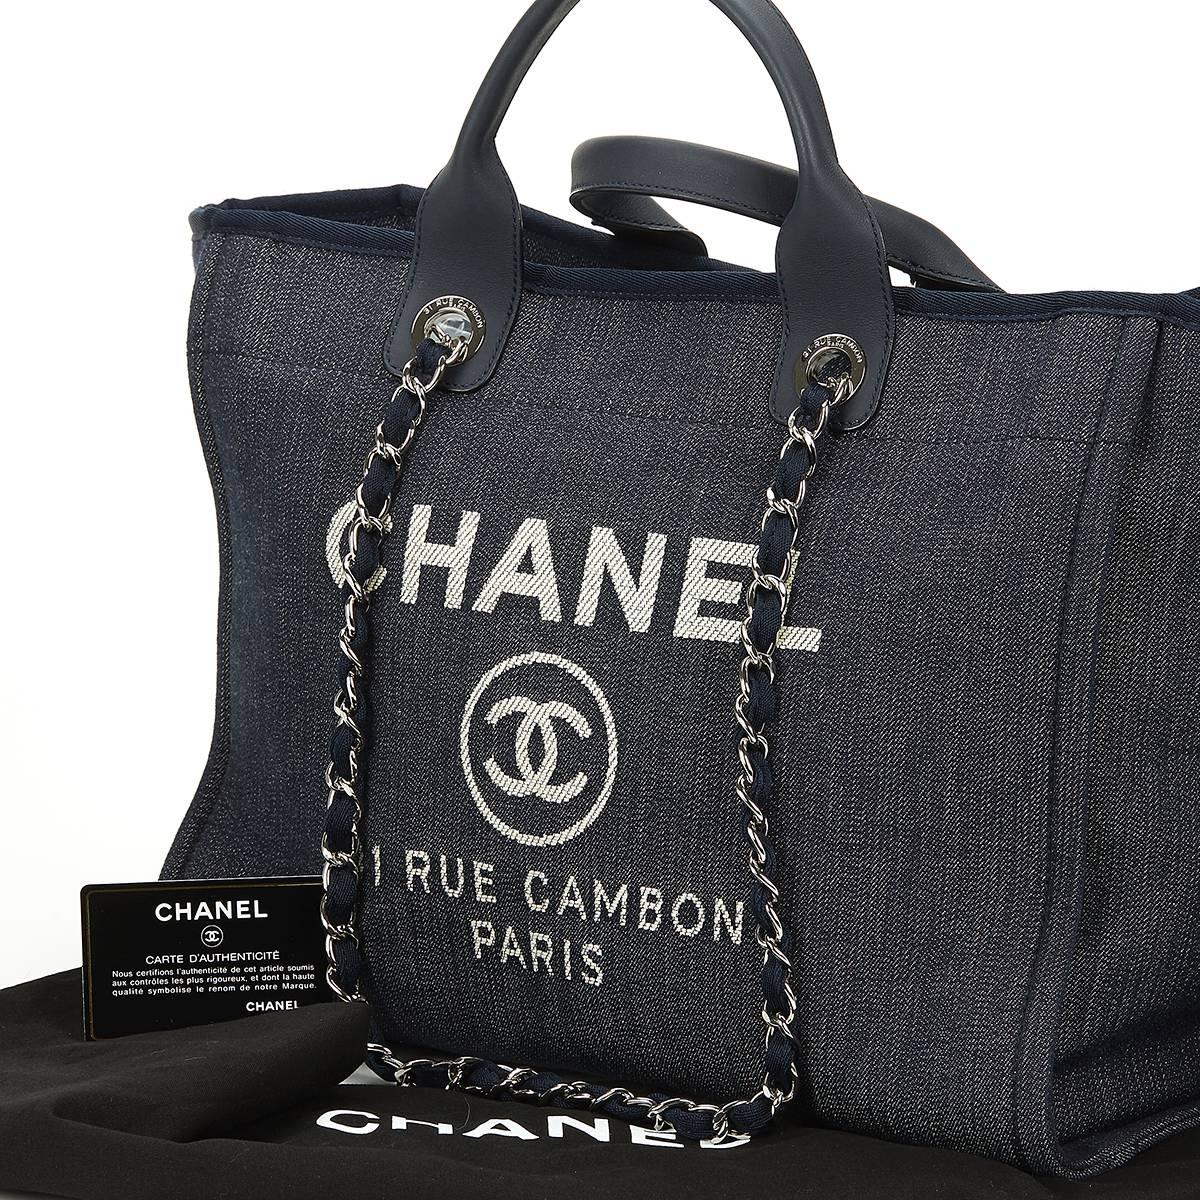 CHANEL
Navy Canvas Large Deauville Tote

This CHANEL Large Deauville Tote is in Excellent Pre-Owned Condition accompanied by Chanel Dust Bag, Authenticity Card. Circa 2014. Primarily made from Canvas complimented by Silver hardware. Our 